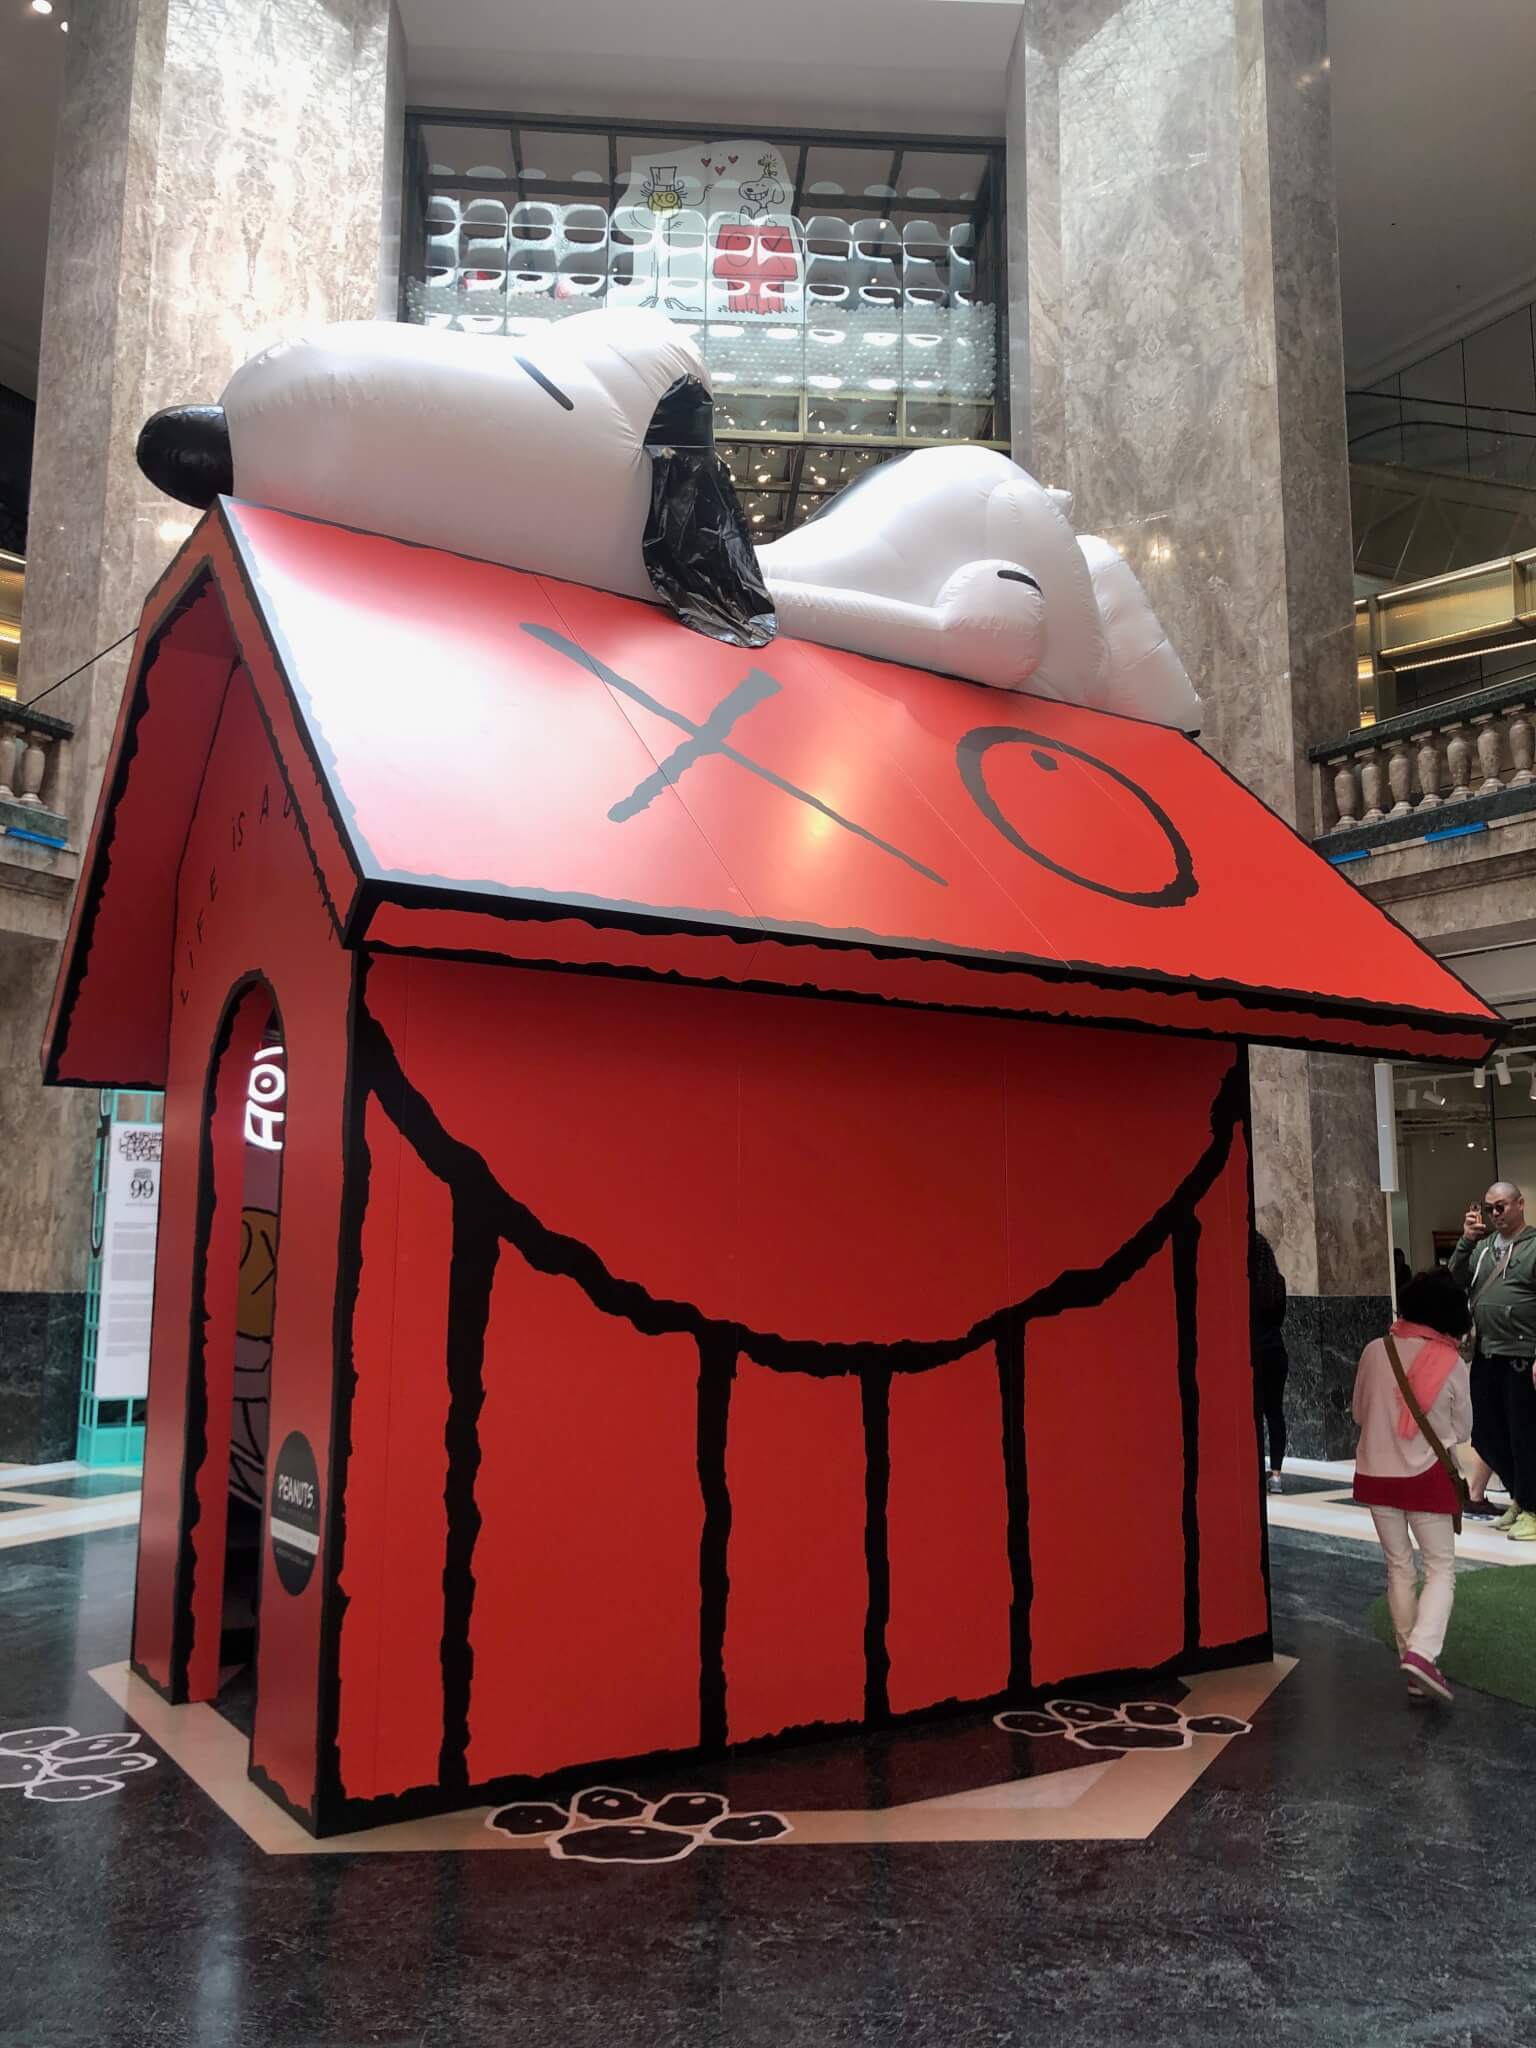 2.Snoopy x André Mr. A was a special pop-up at Galeries Lafayette Champs-Élysées in May 2019. There, I met Mimi while we were both looking at the Snoopy T-shirts. Mimi danced for the prestigious Paris Opera Ballet for most of her career. She shared with me her secret: “The magic is that you have to respect your body. Your body speaks to you and you have to love it. Remember that everything starts with you. Nothing is an accident in life.” 